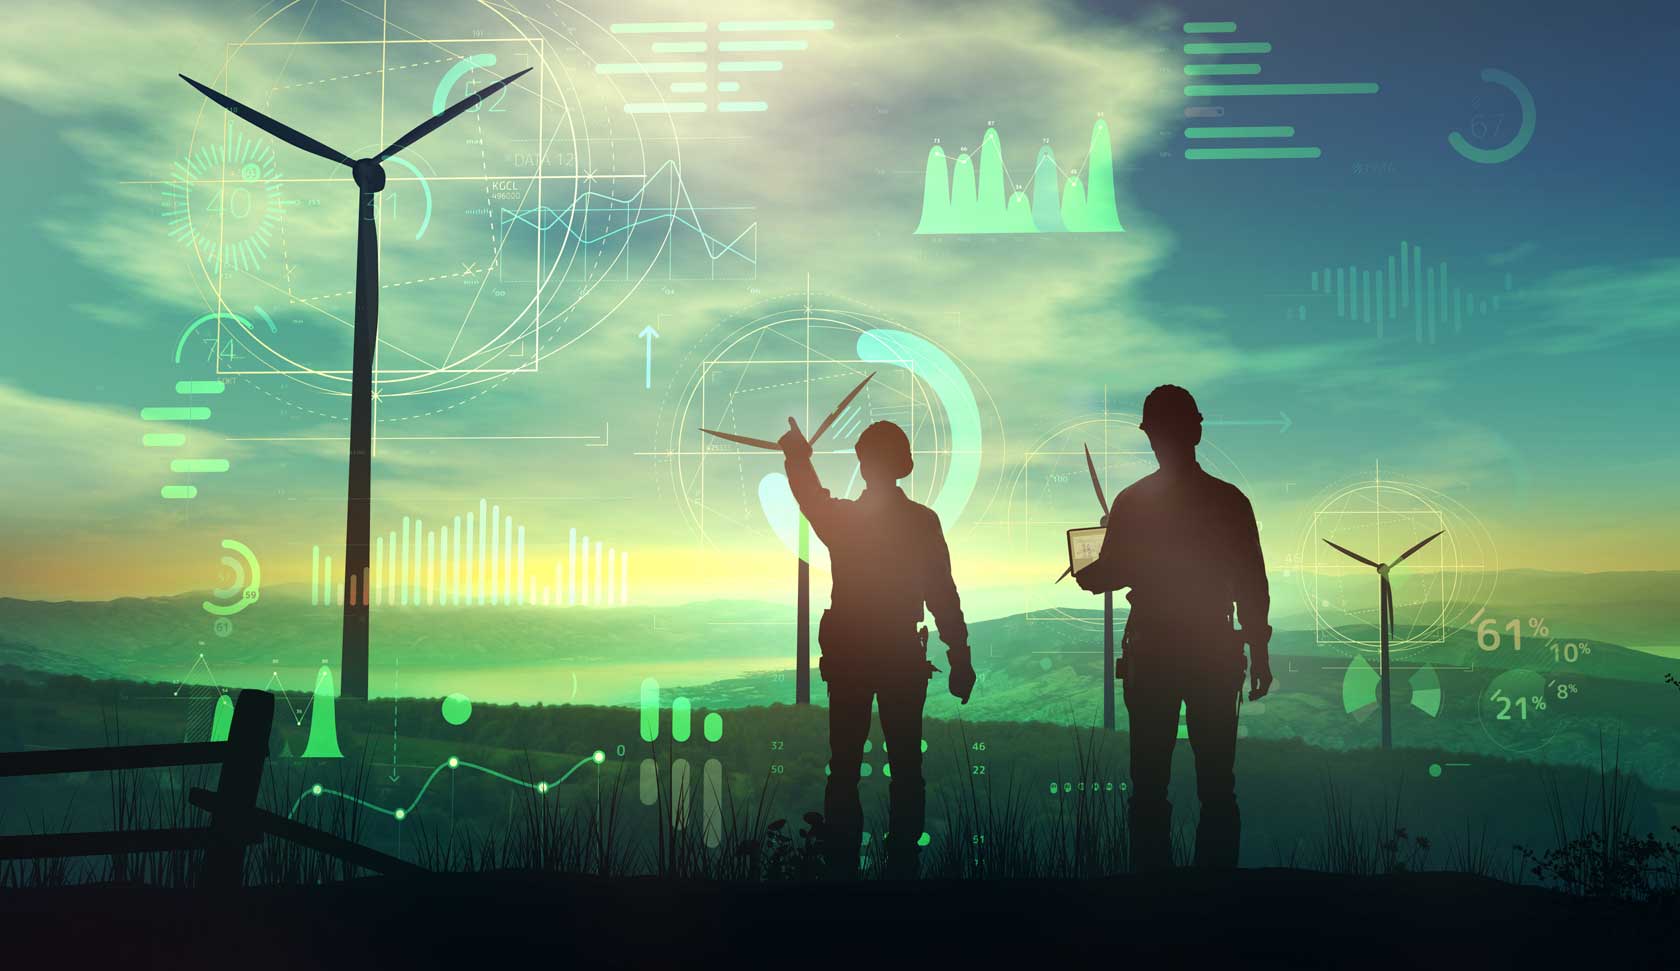 Green Energy Jobs: The Future of Work